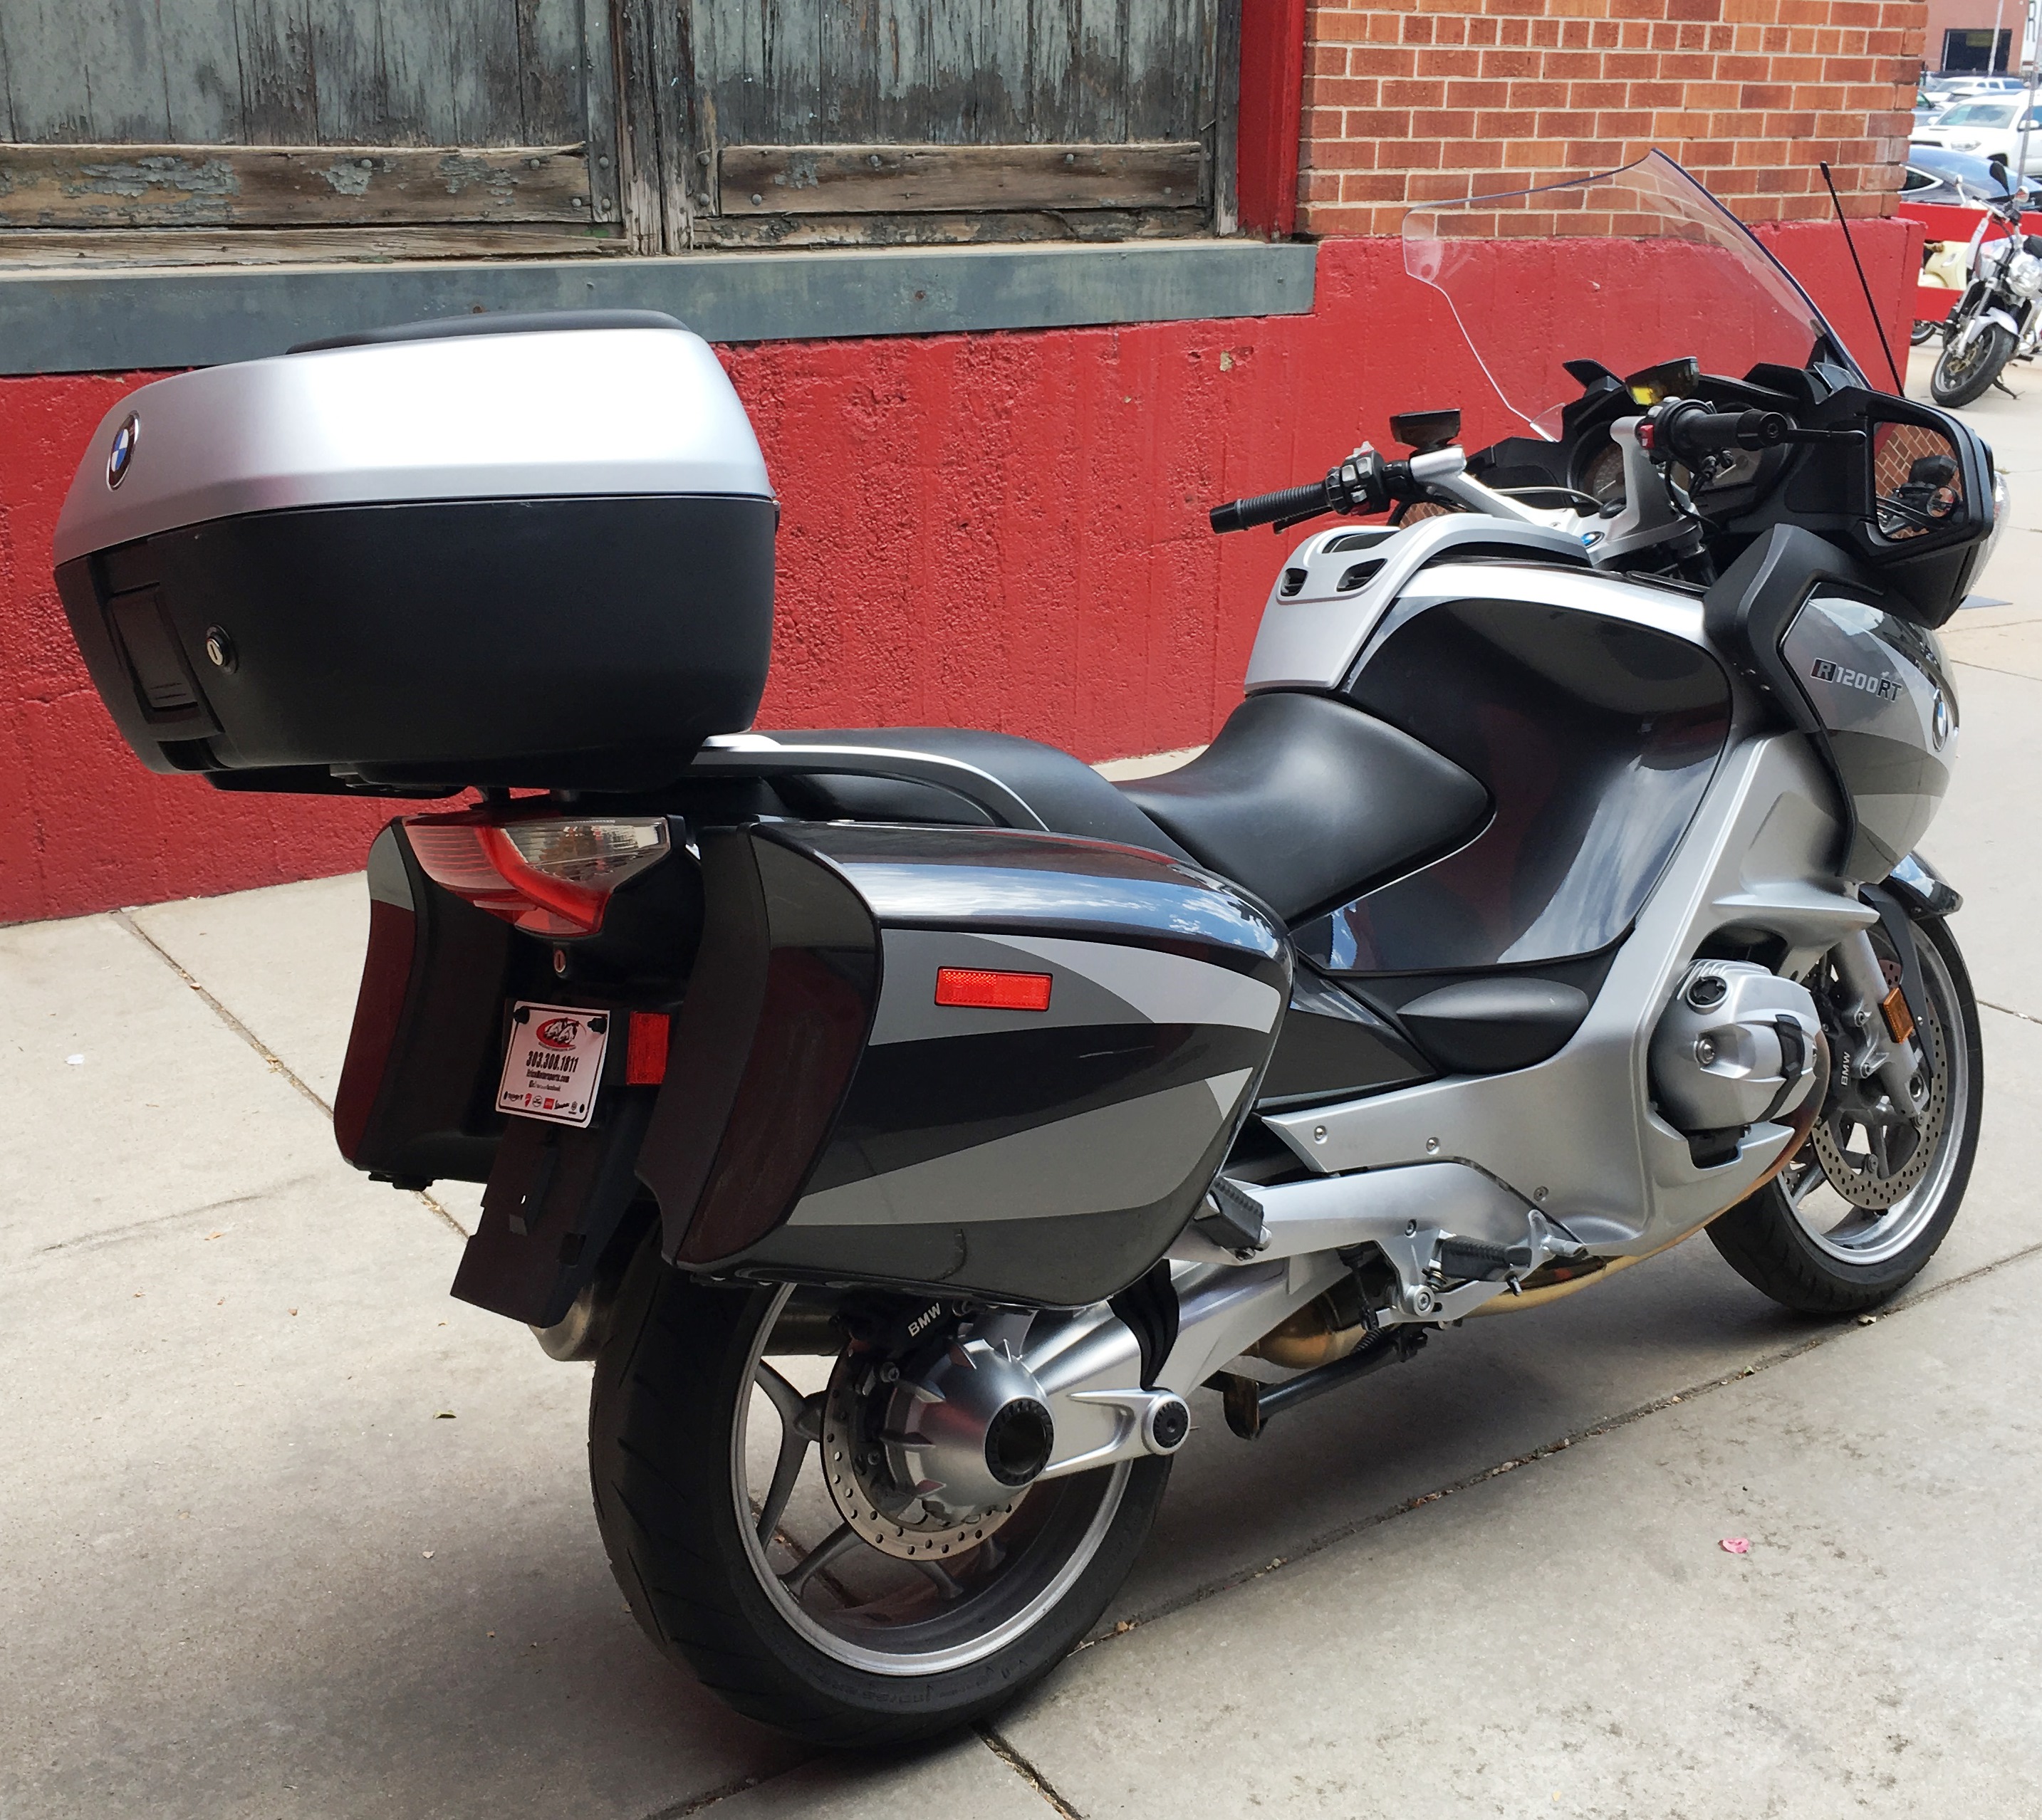 PreOwned 2010 BMW R1200RT Motorcycle in Denver 1977